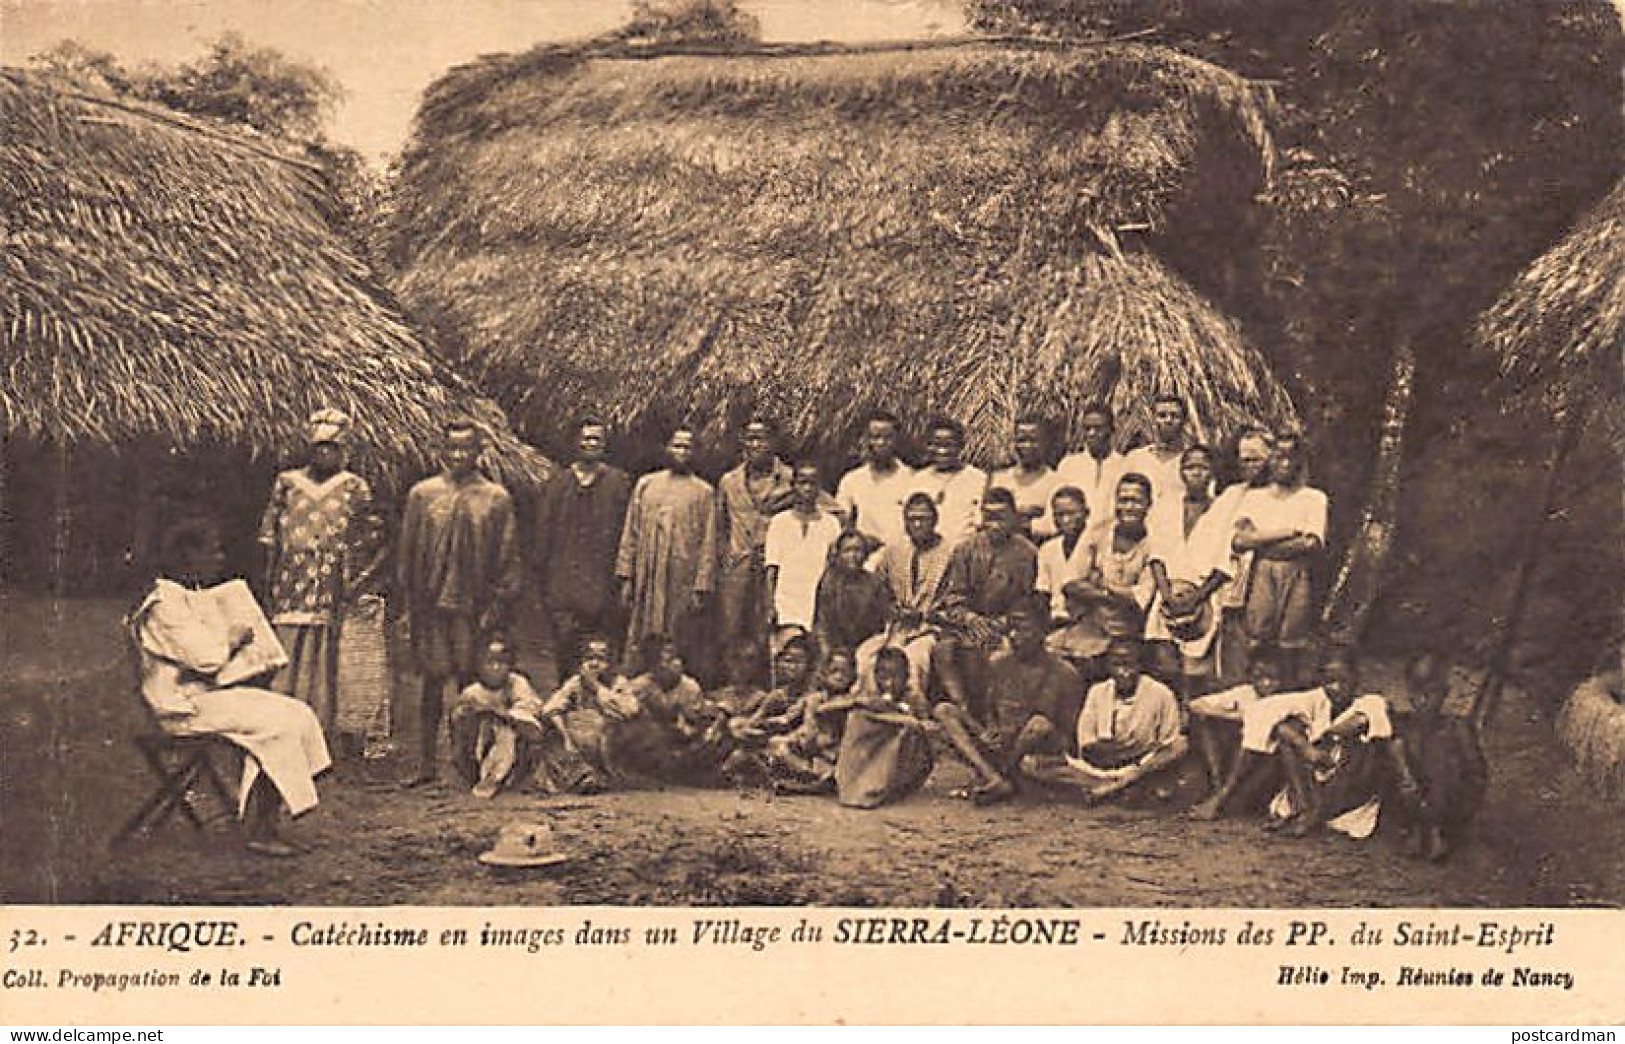 Sierra Leone - Catechism In Pictures In A Village - Missions Of The Fathers Of The Holy Spirit - Publ. Propagation De La - Sierra Leone